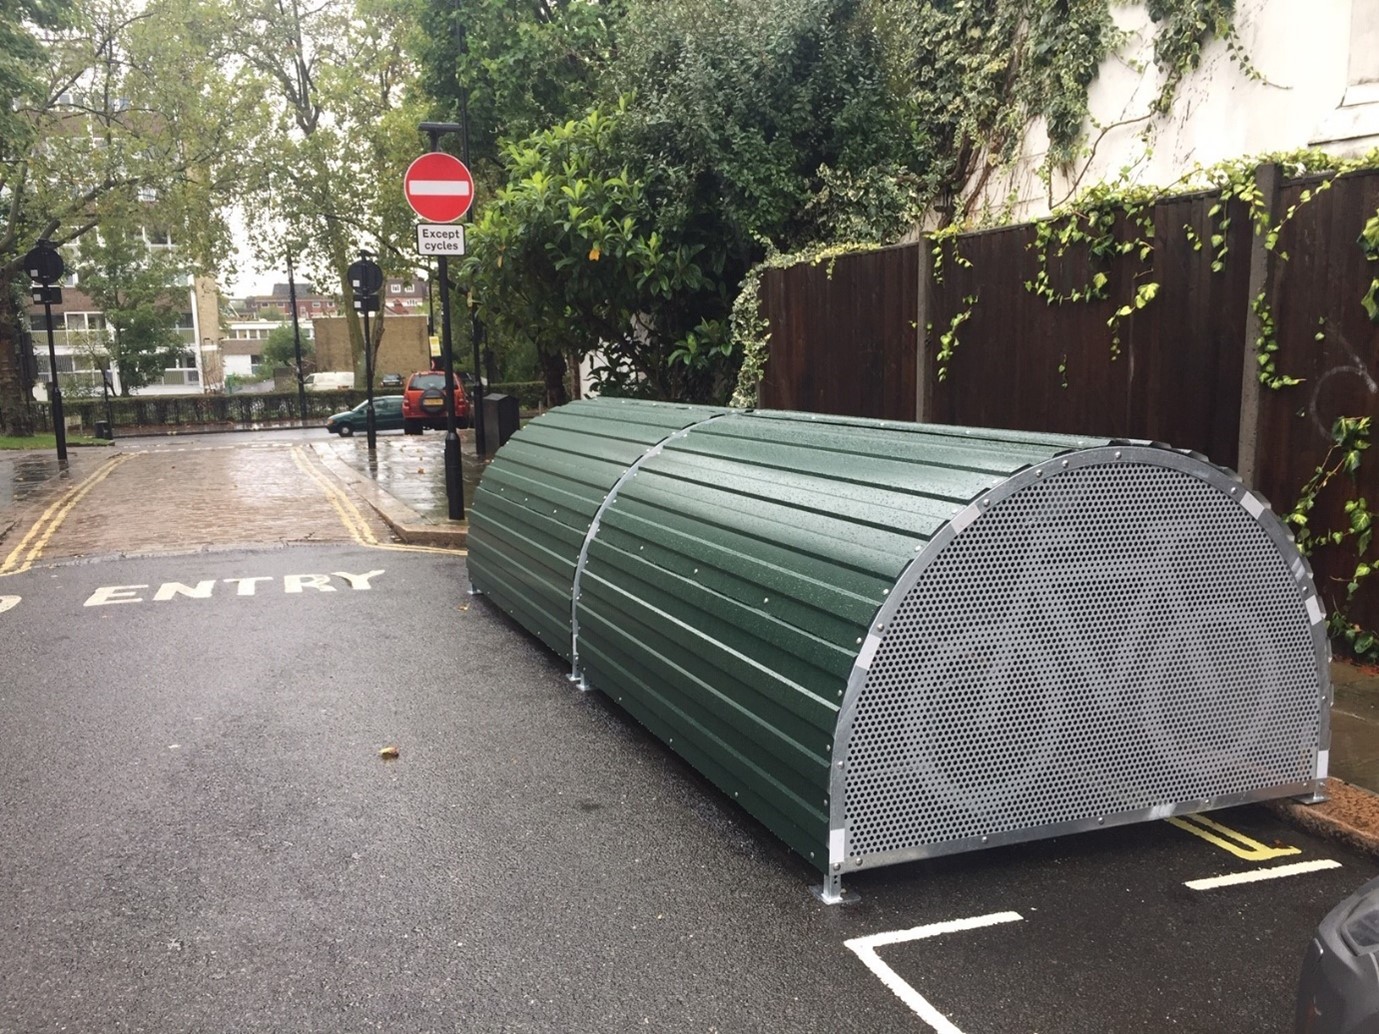 Cycle hangar in green a curved metal 